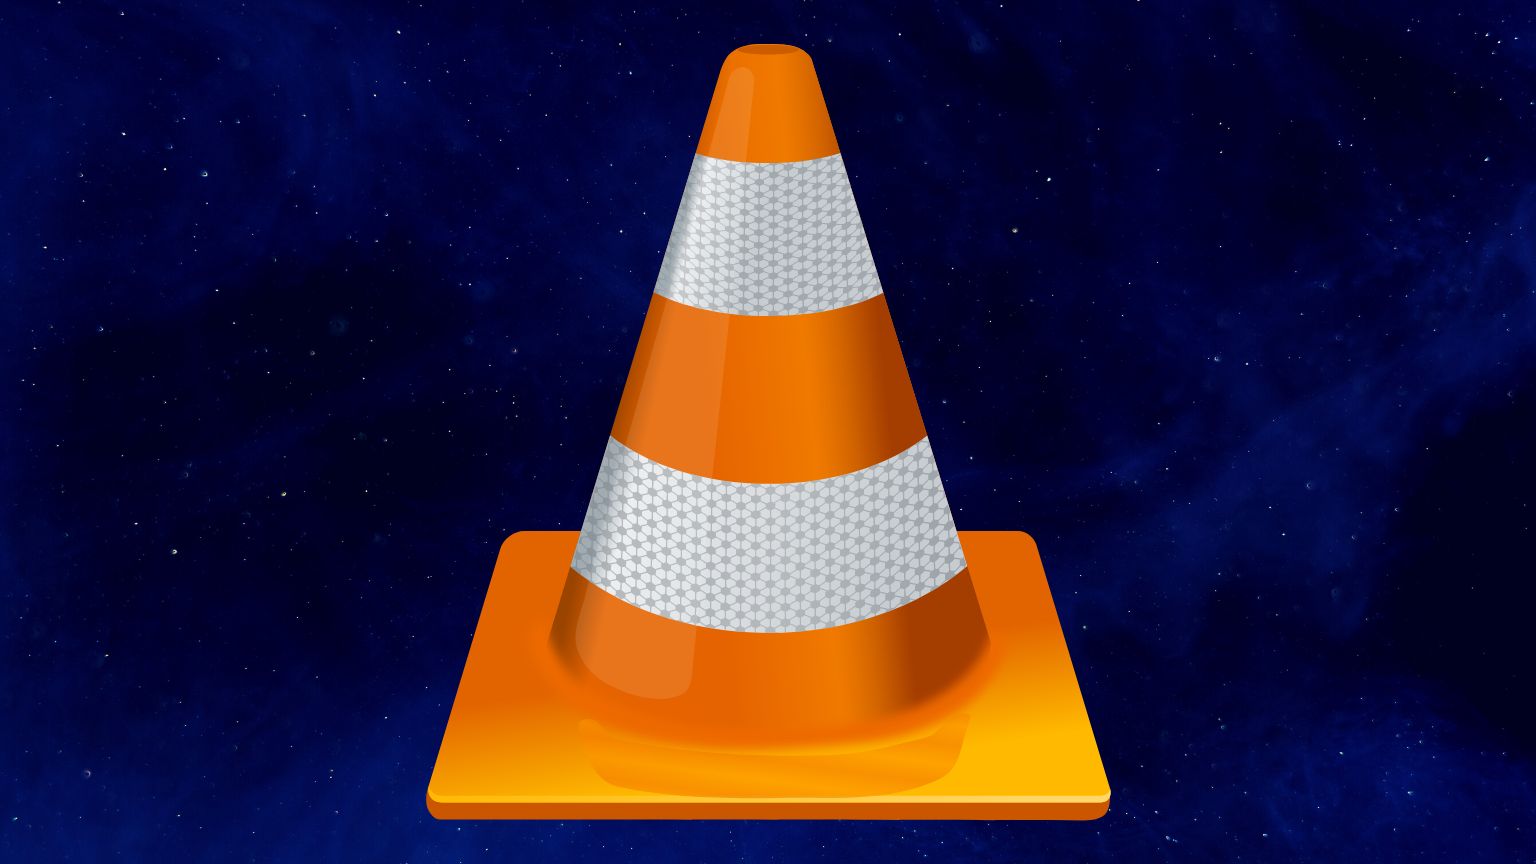 VLC creator considers suing India’s government over website blocking